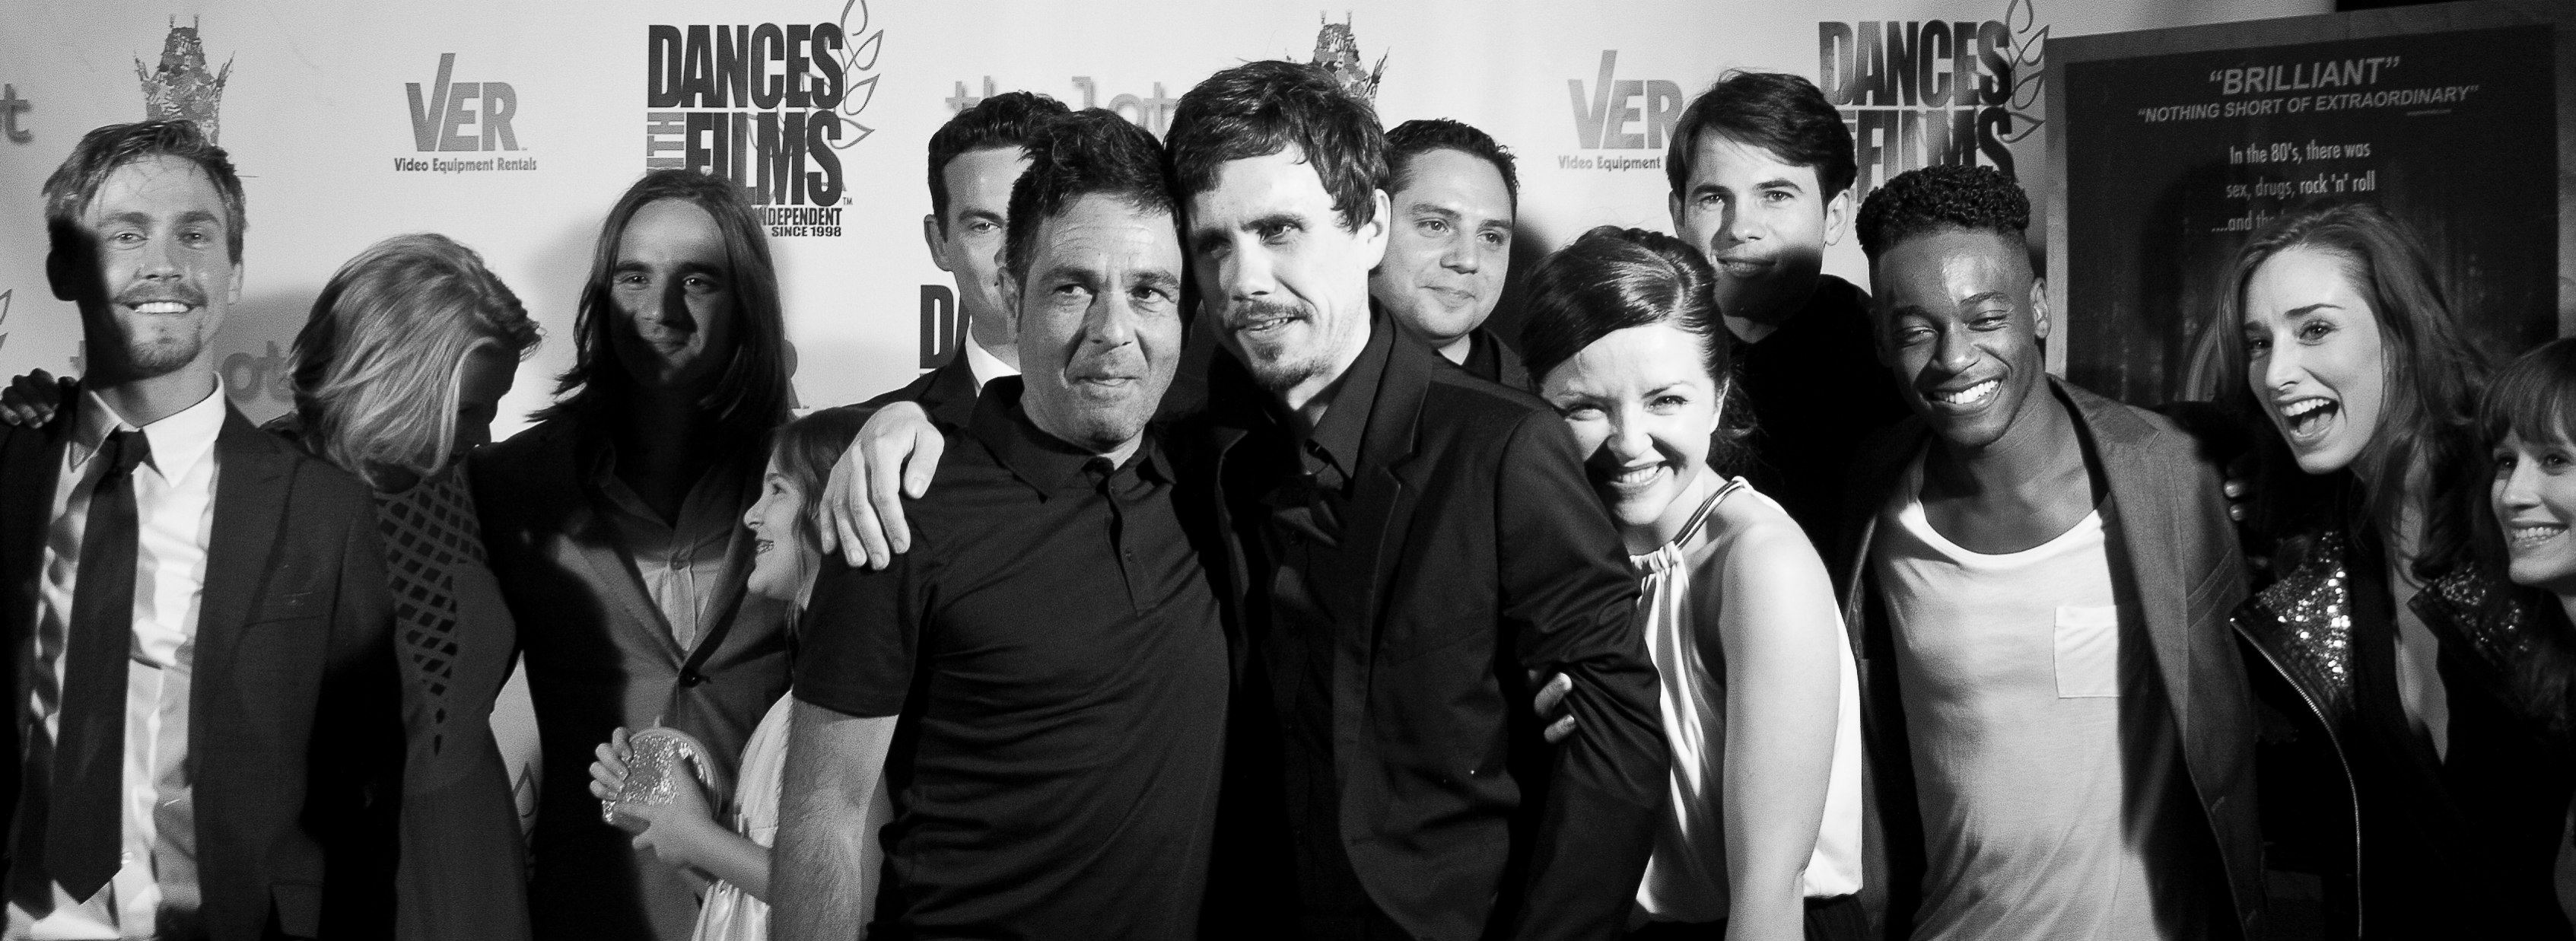 'The Toy Soldiers' World Premiere at Dances With Films - Hollywood's Chinese Theatres - June 2014. With Kevin Pinassi and cast.